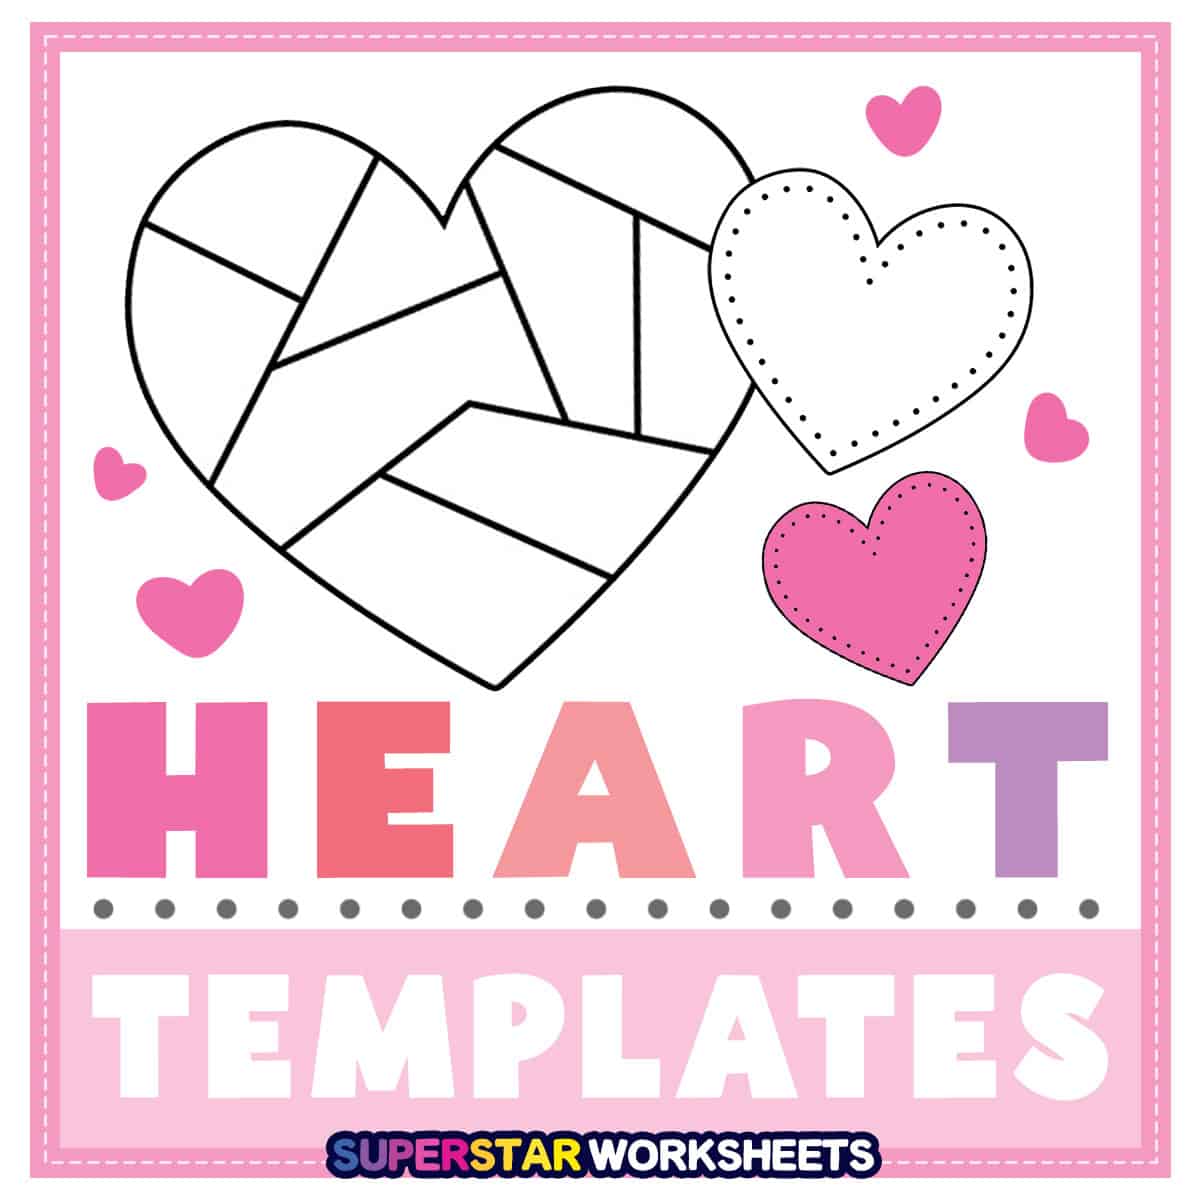 Free Printable Heart Templates (Different Sizes & Colored Hearts)